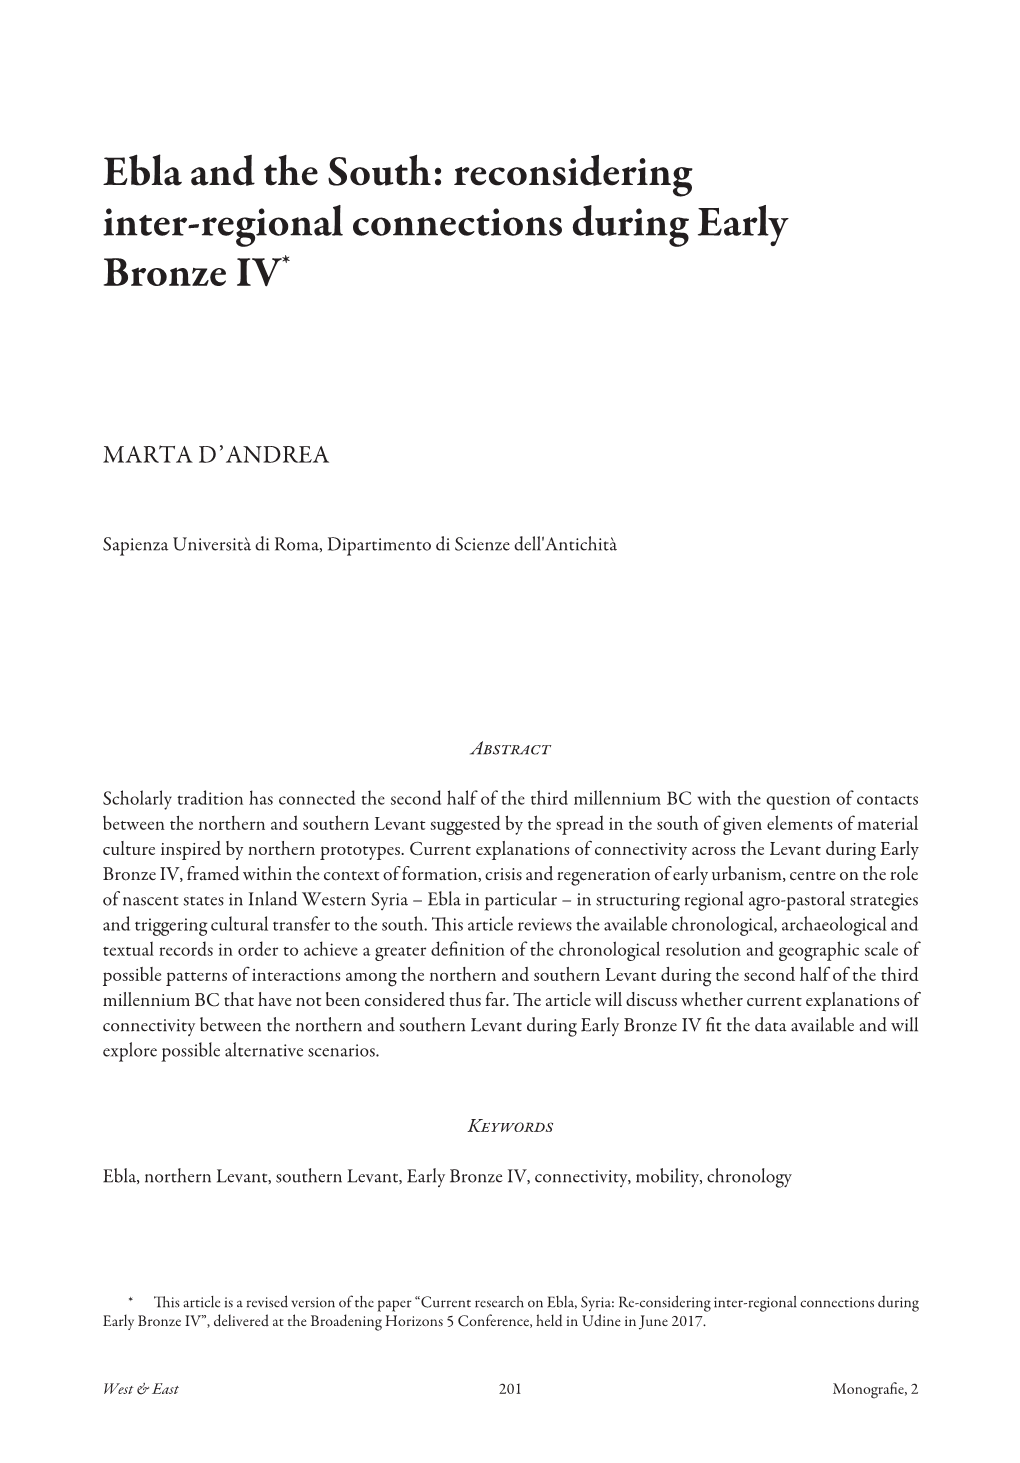 Reconsidering Inter-Regional Connections During Early Bronze IV*